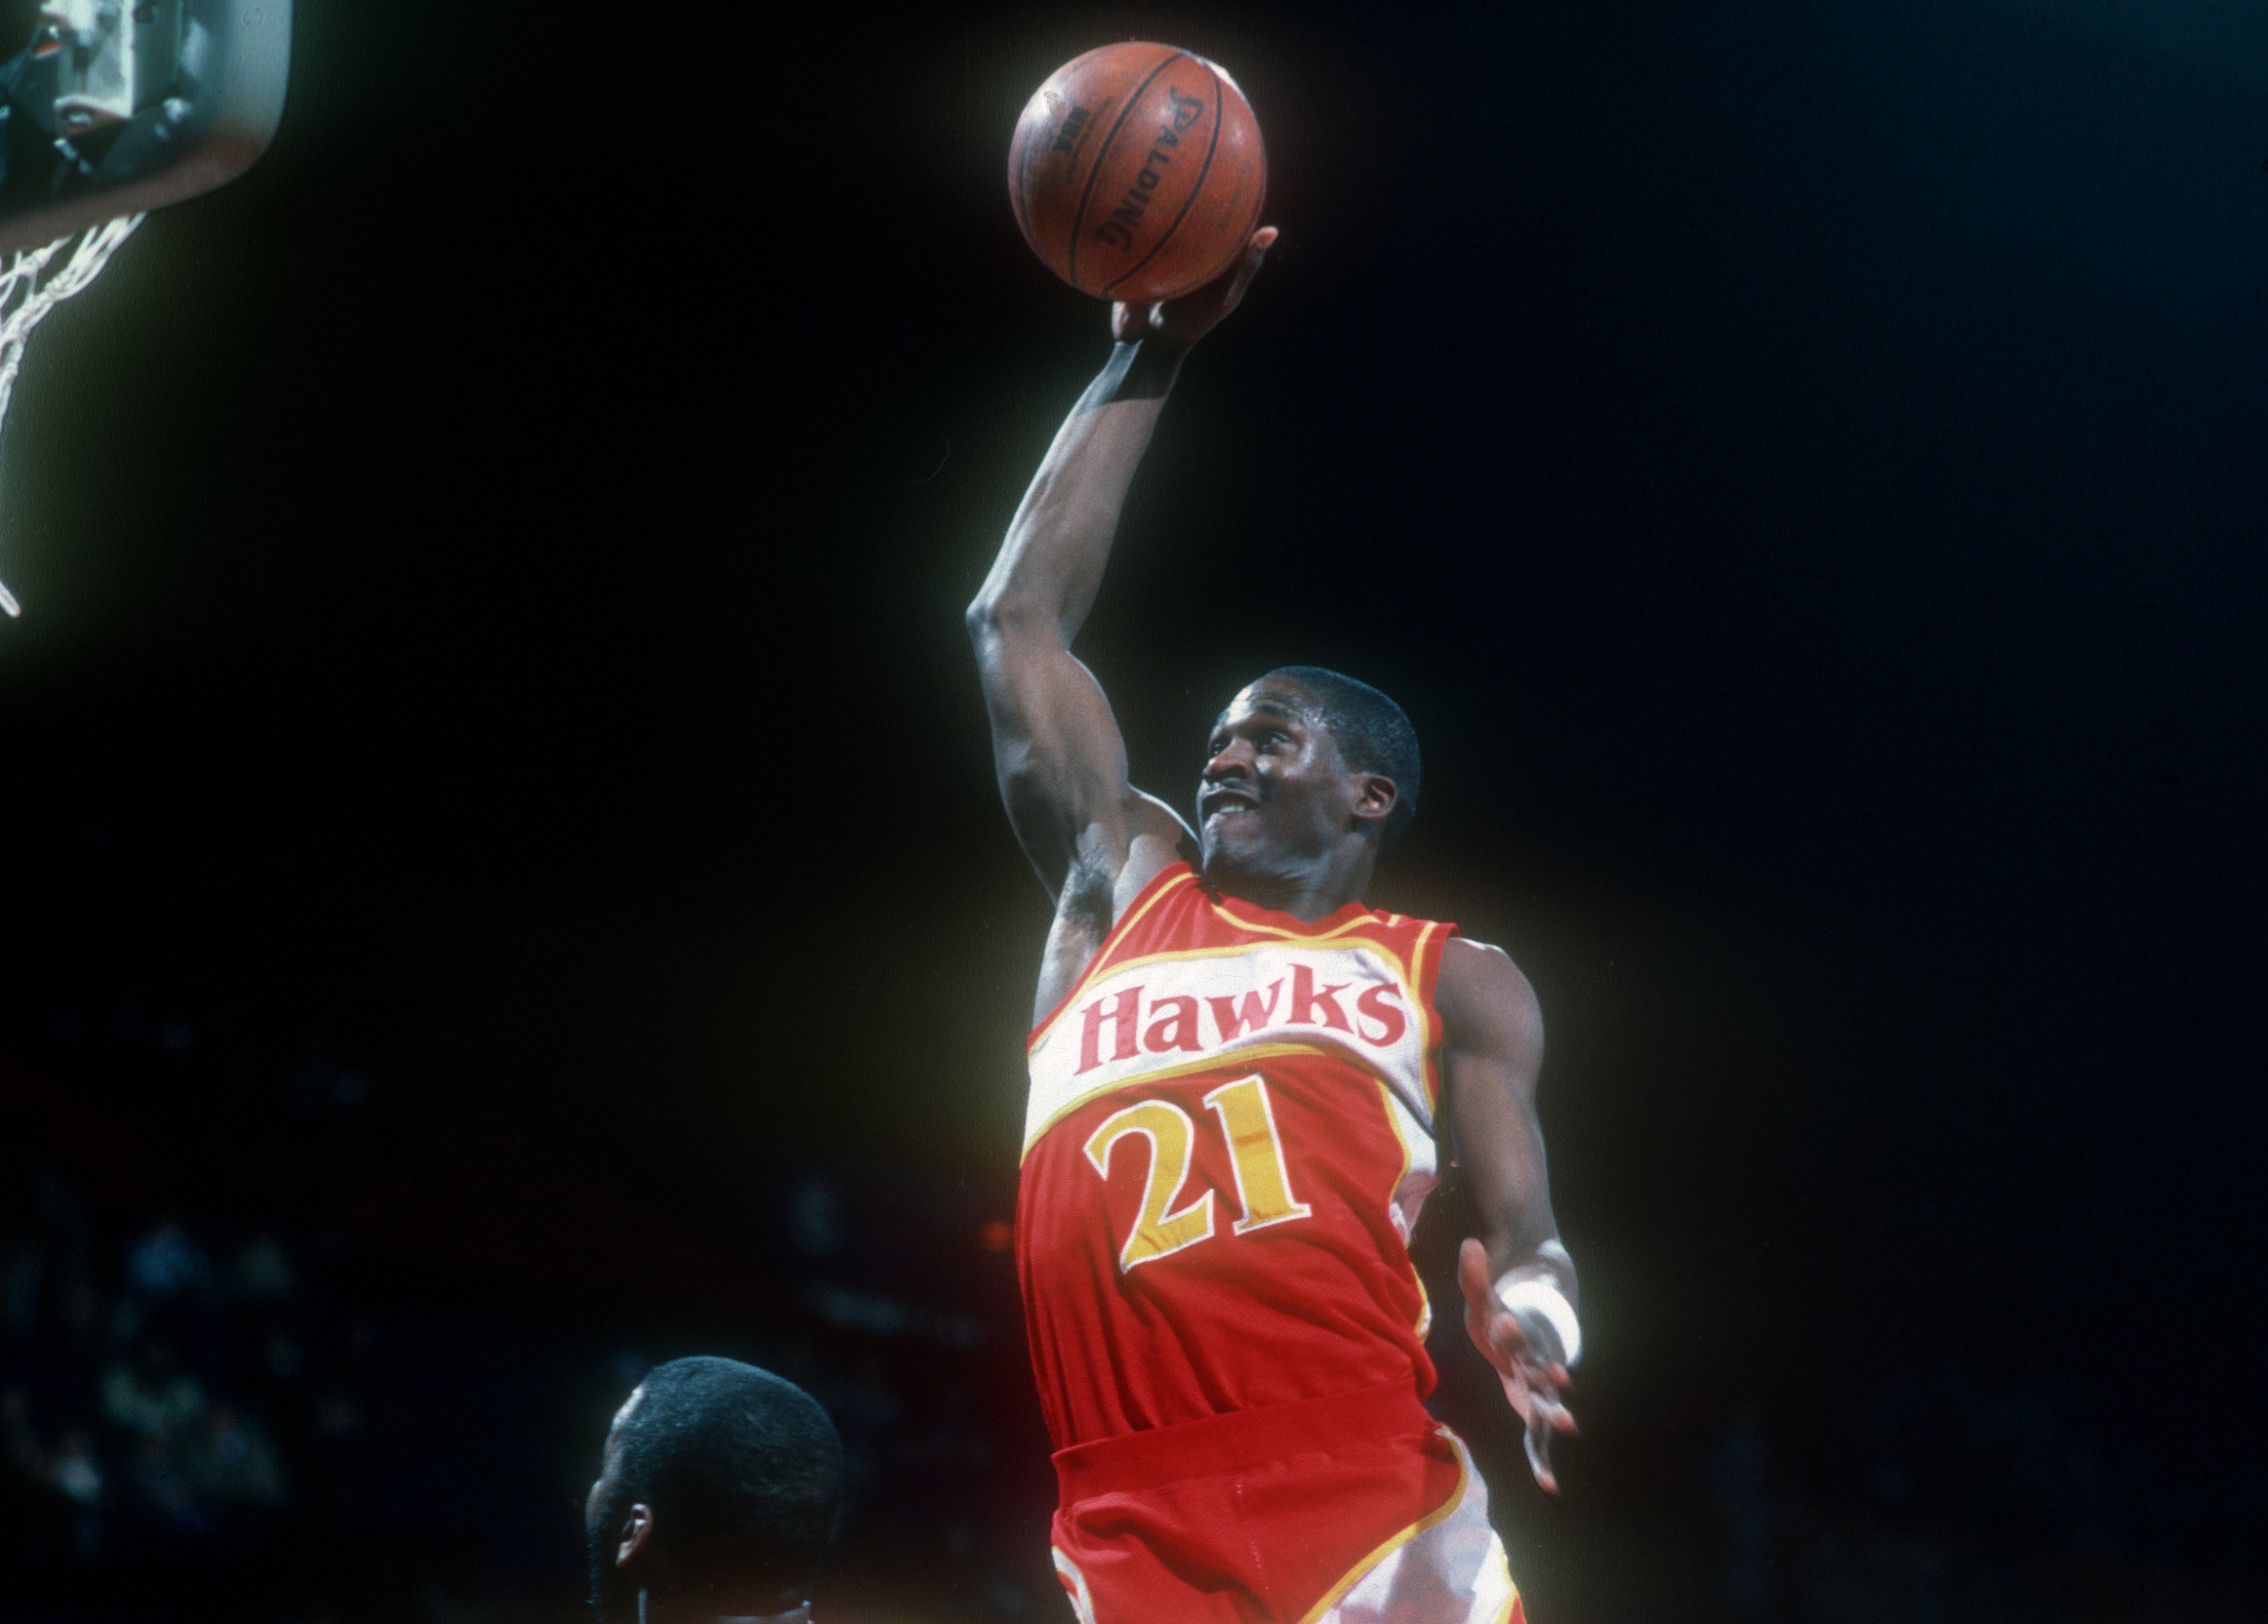 Dominique Wilkins of the Atlanta Hawks drives to the basket during a NBA game against the Washington Bullets.